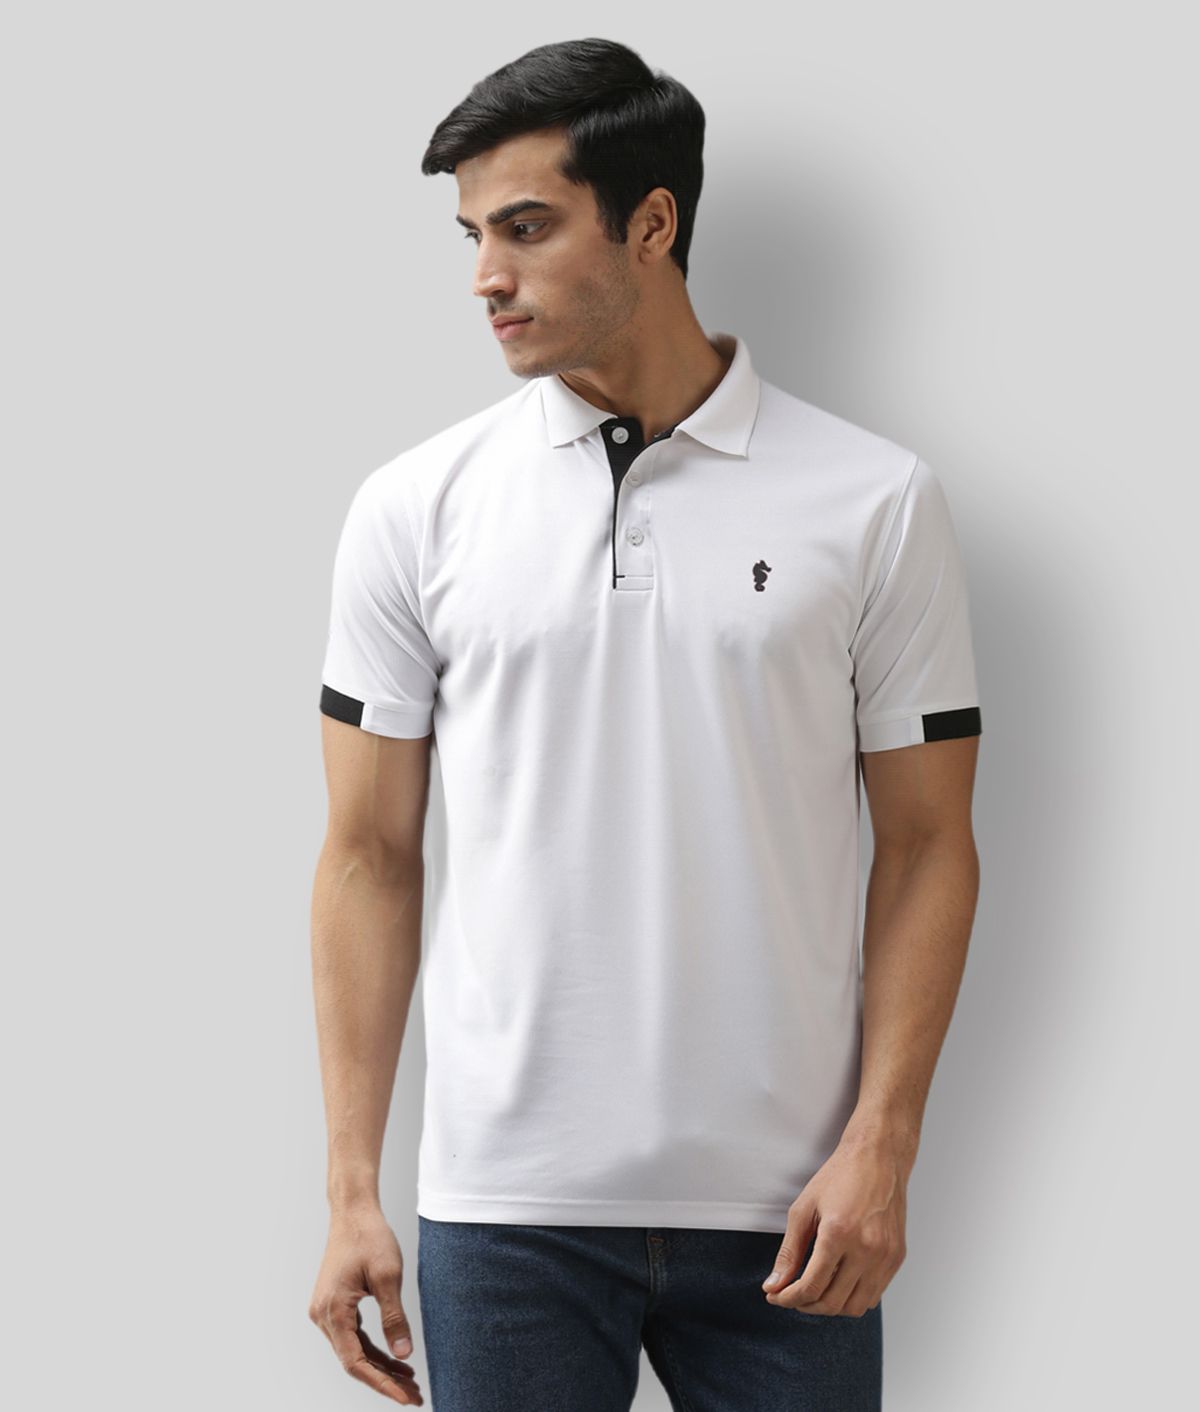     			EPPE - White Polyester Regular Fit Men's Sports Polo T-Shirt ( Pack of 1 )